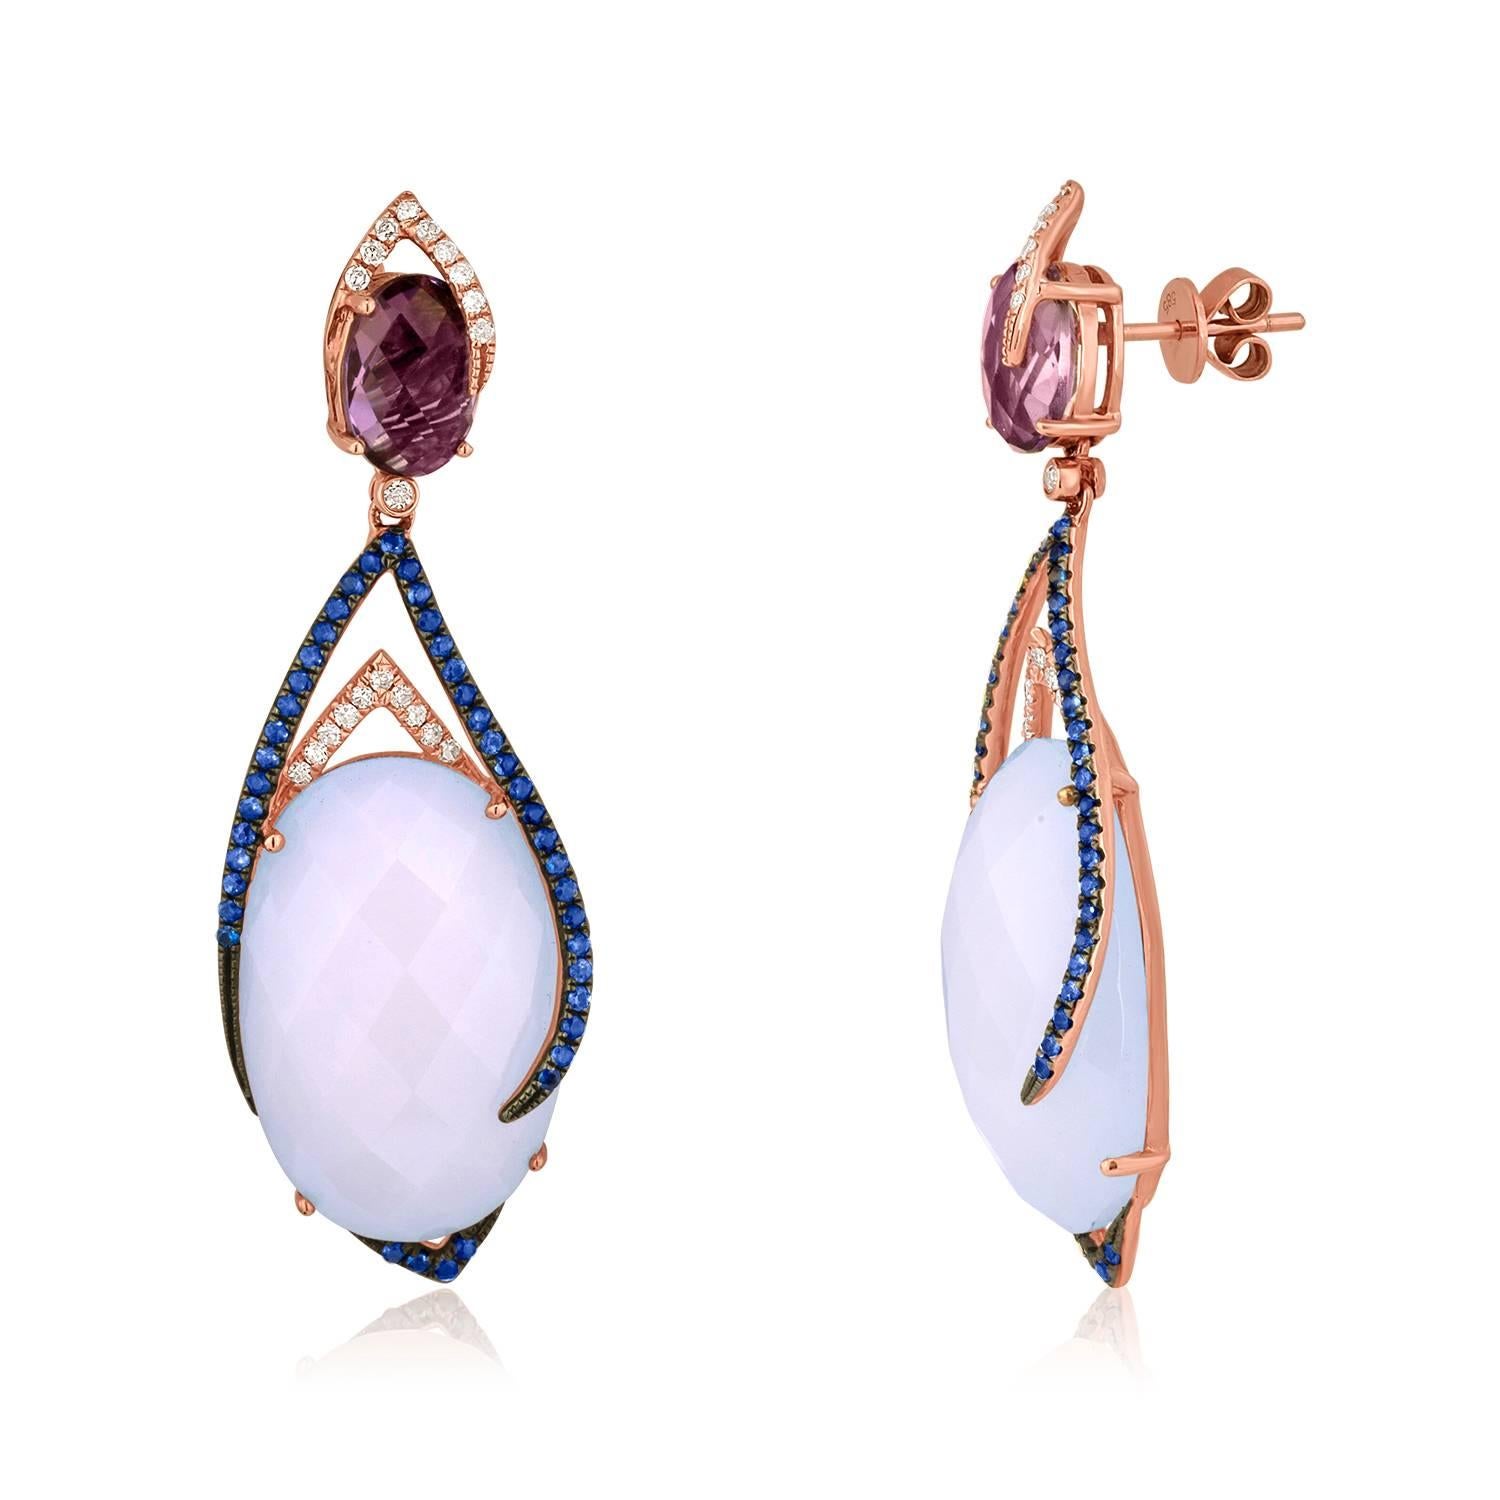 Very Beautiful and Special Chalcedony Set
The earrings are 14K Rose Gold with 0.33ct Diamonds.
There are 0.79ct in Blue Sapphires, 35.45ct Chalcedony, & 4.45ct Purple Amethyst.
The earrings measure 2.25